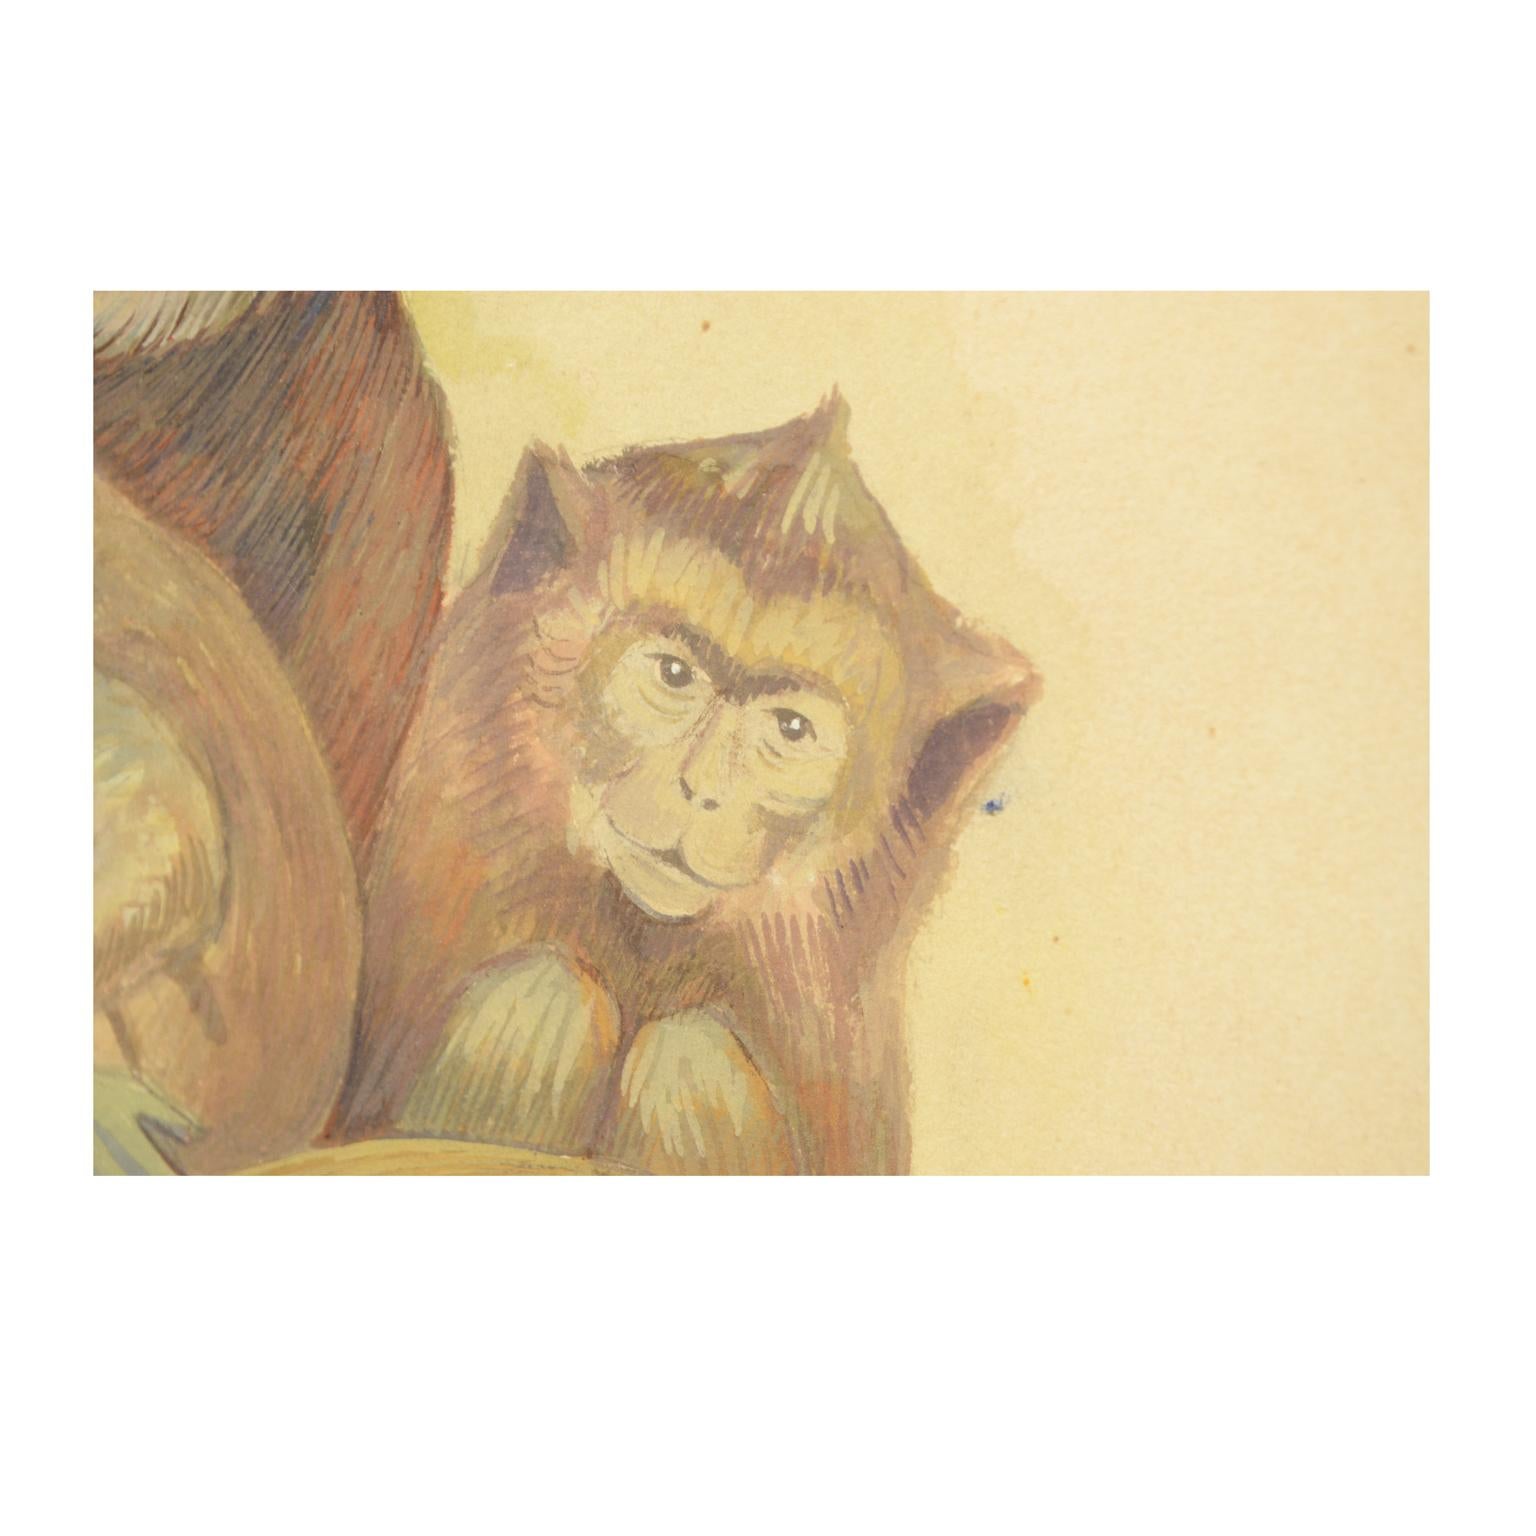 Sketch of Four Macaques Korea 1970s Acrylic on Paper for an Animals Encyclopedia For Sale 2